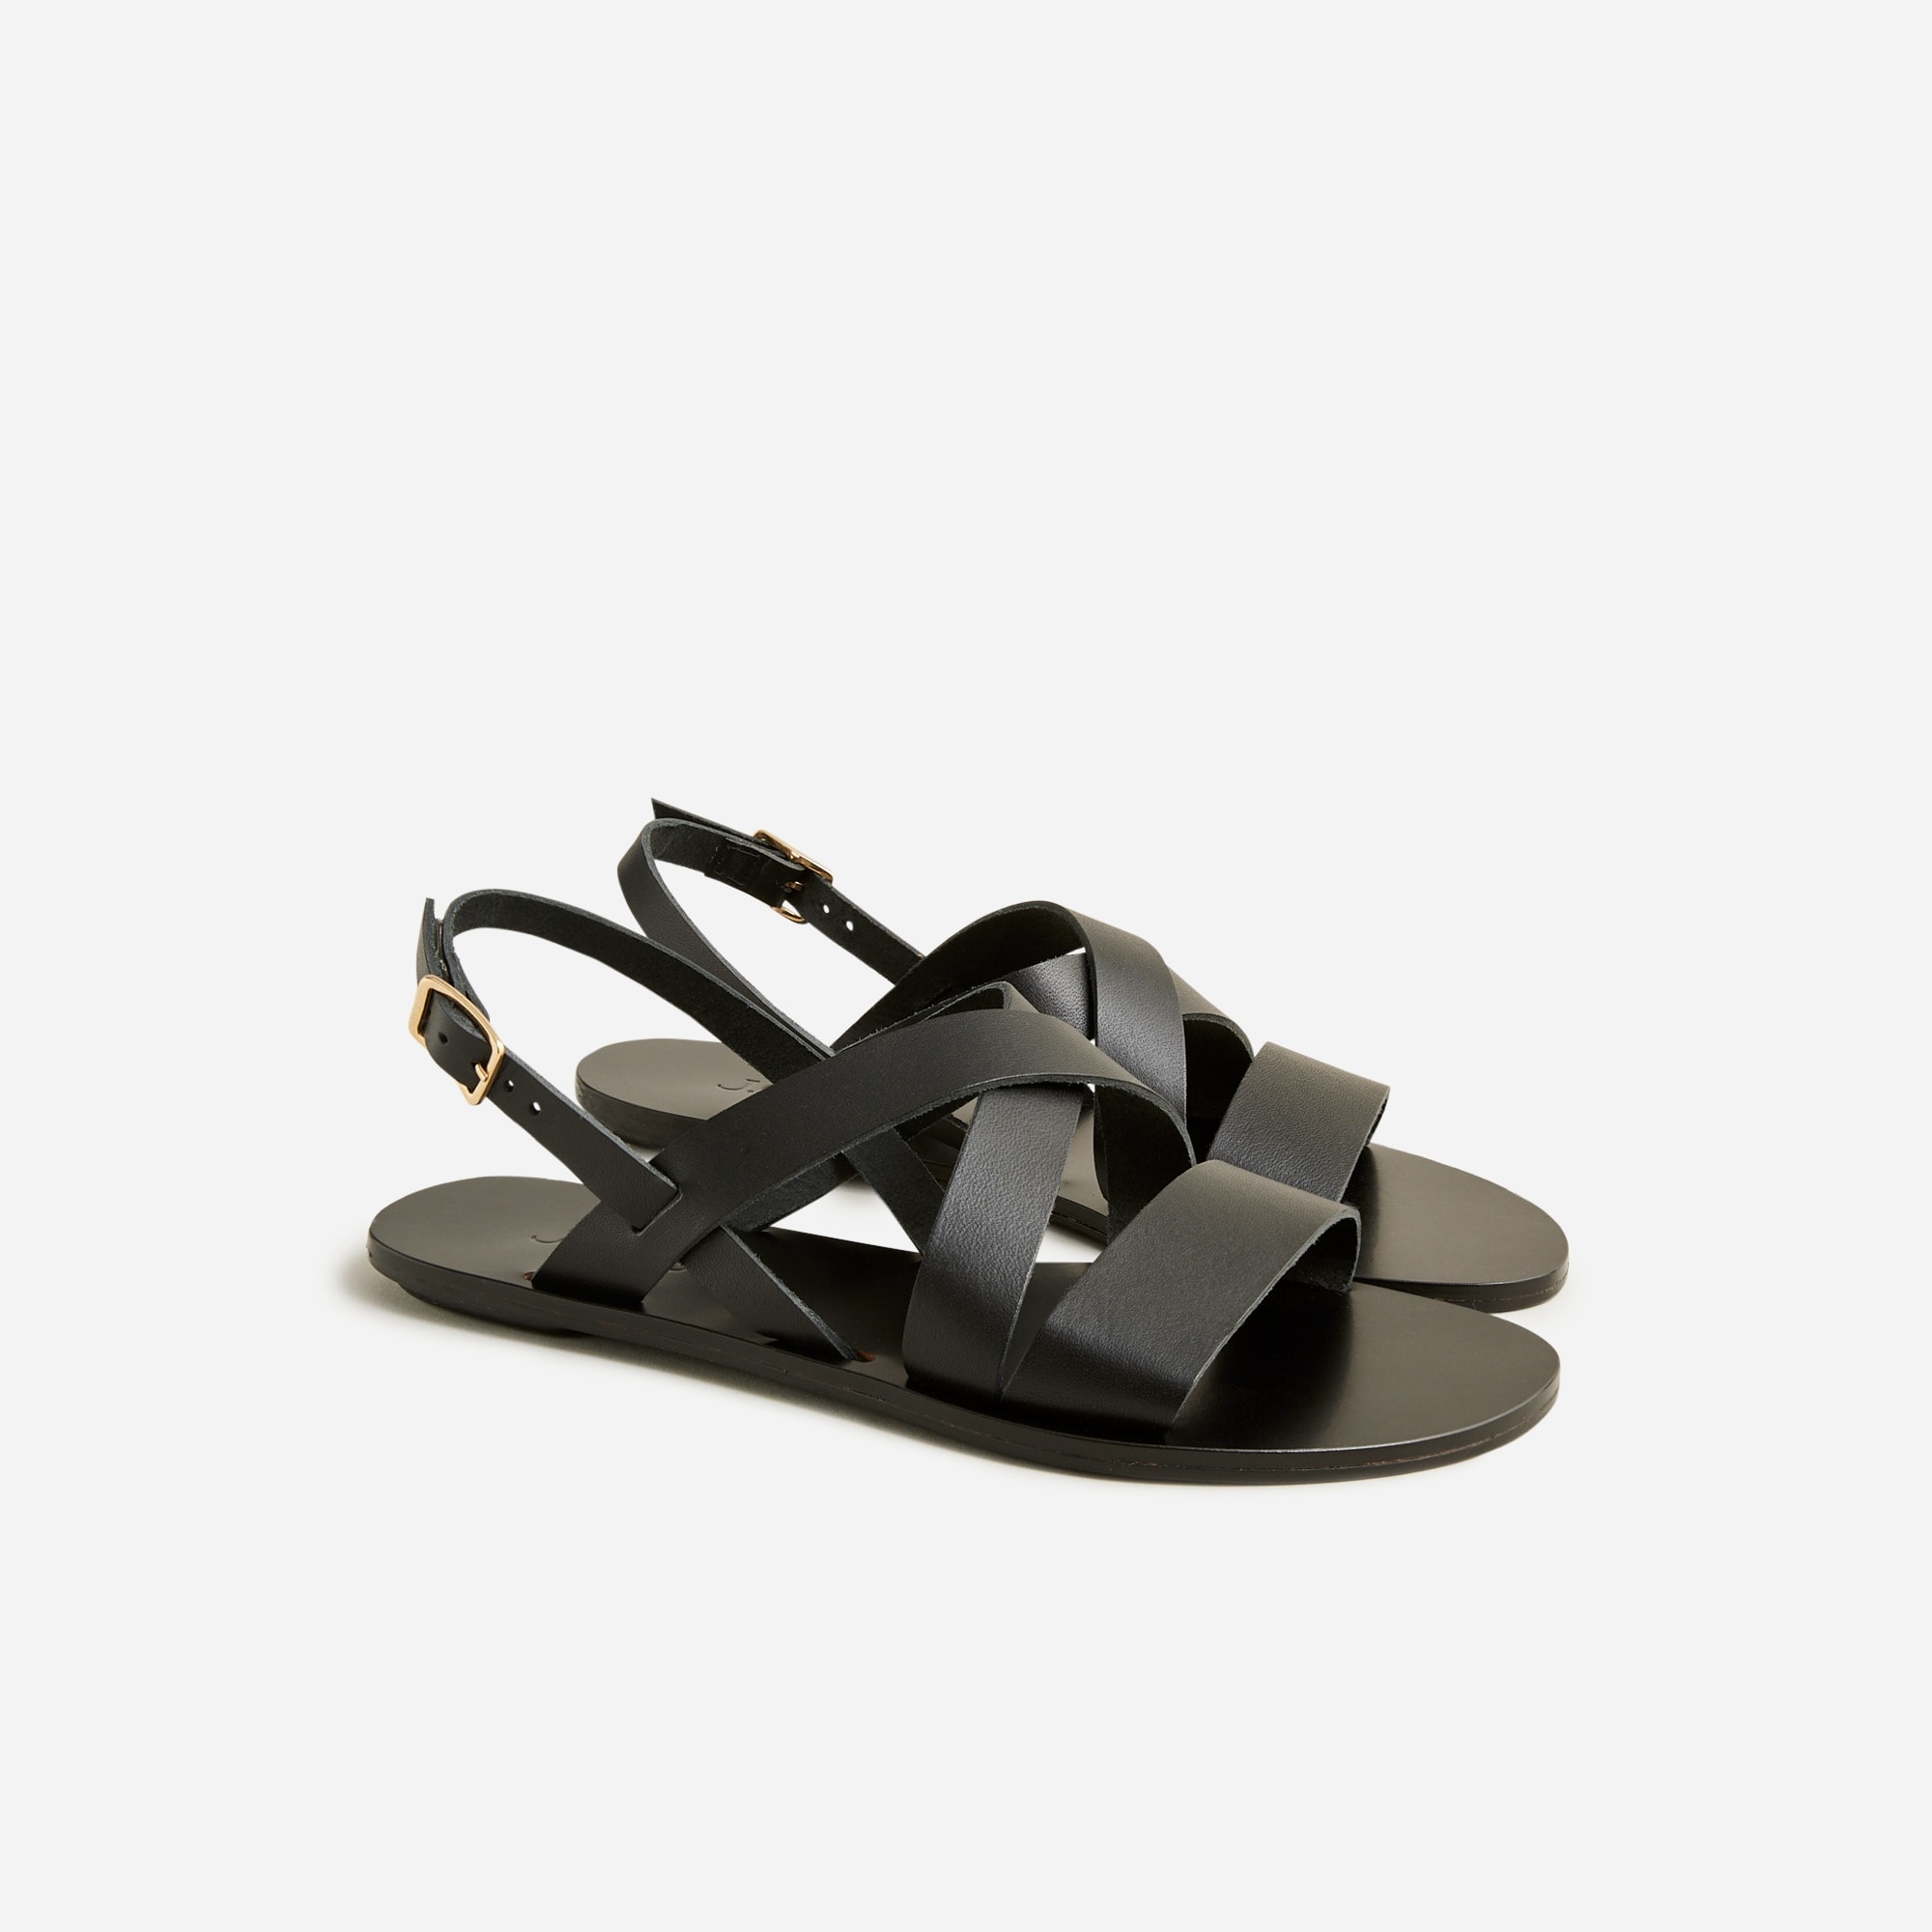 womens Made-in-Italy slingback sandals in leather